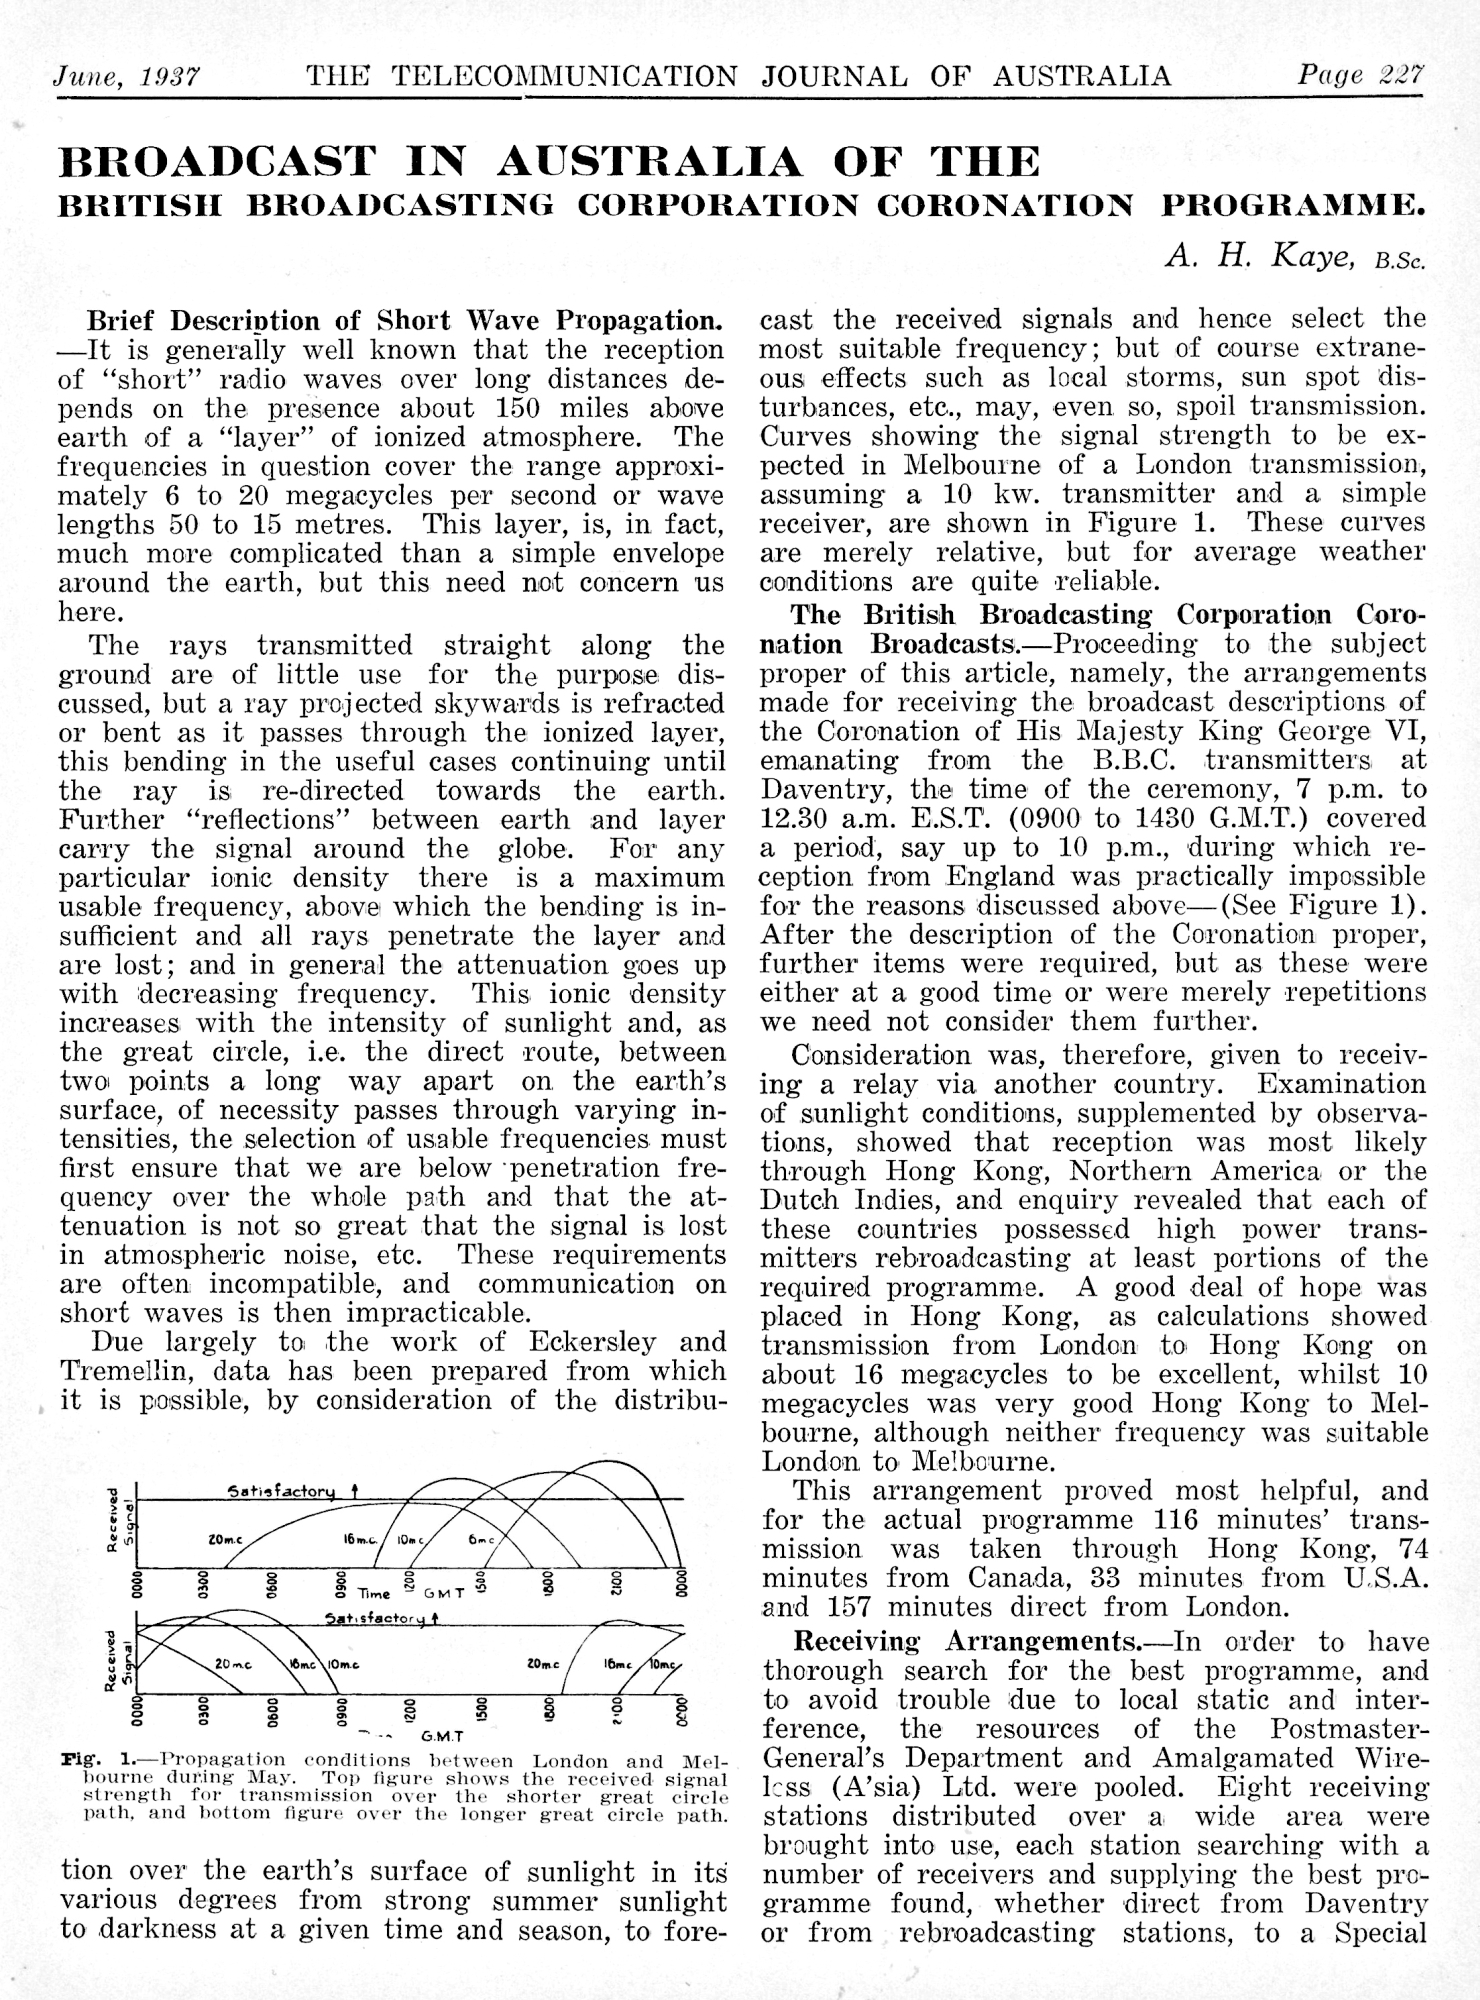 Page 1 of historical paper